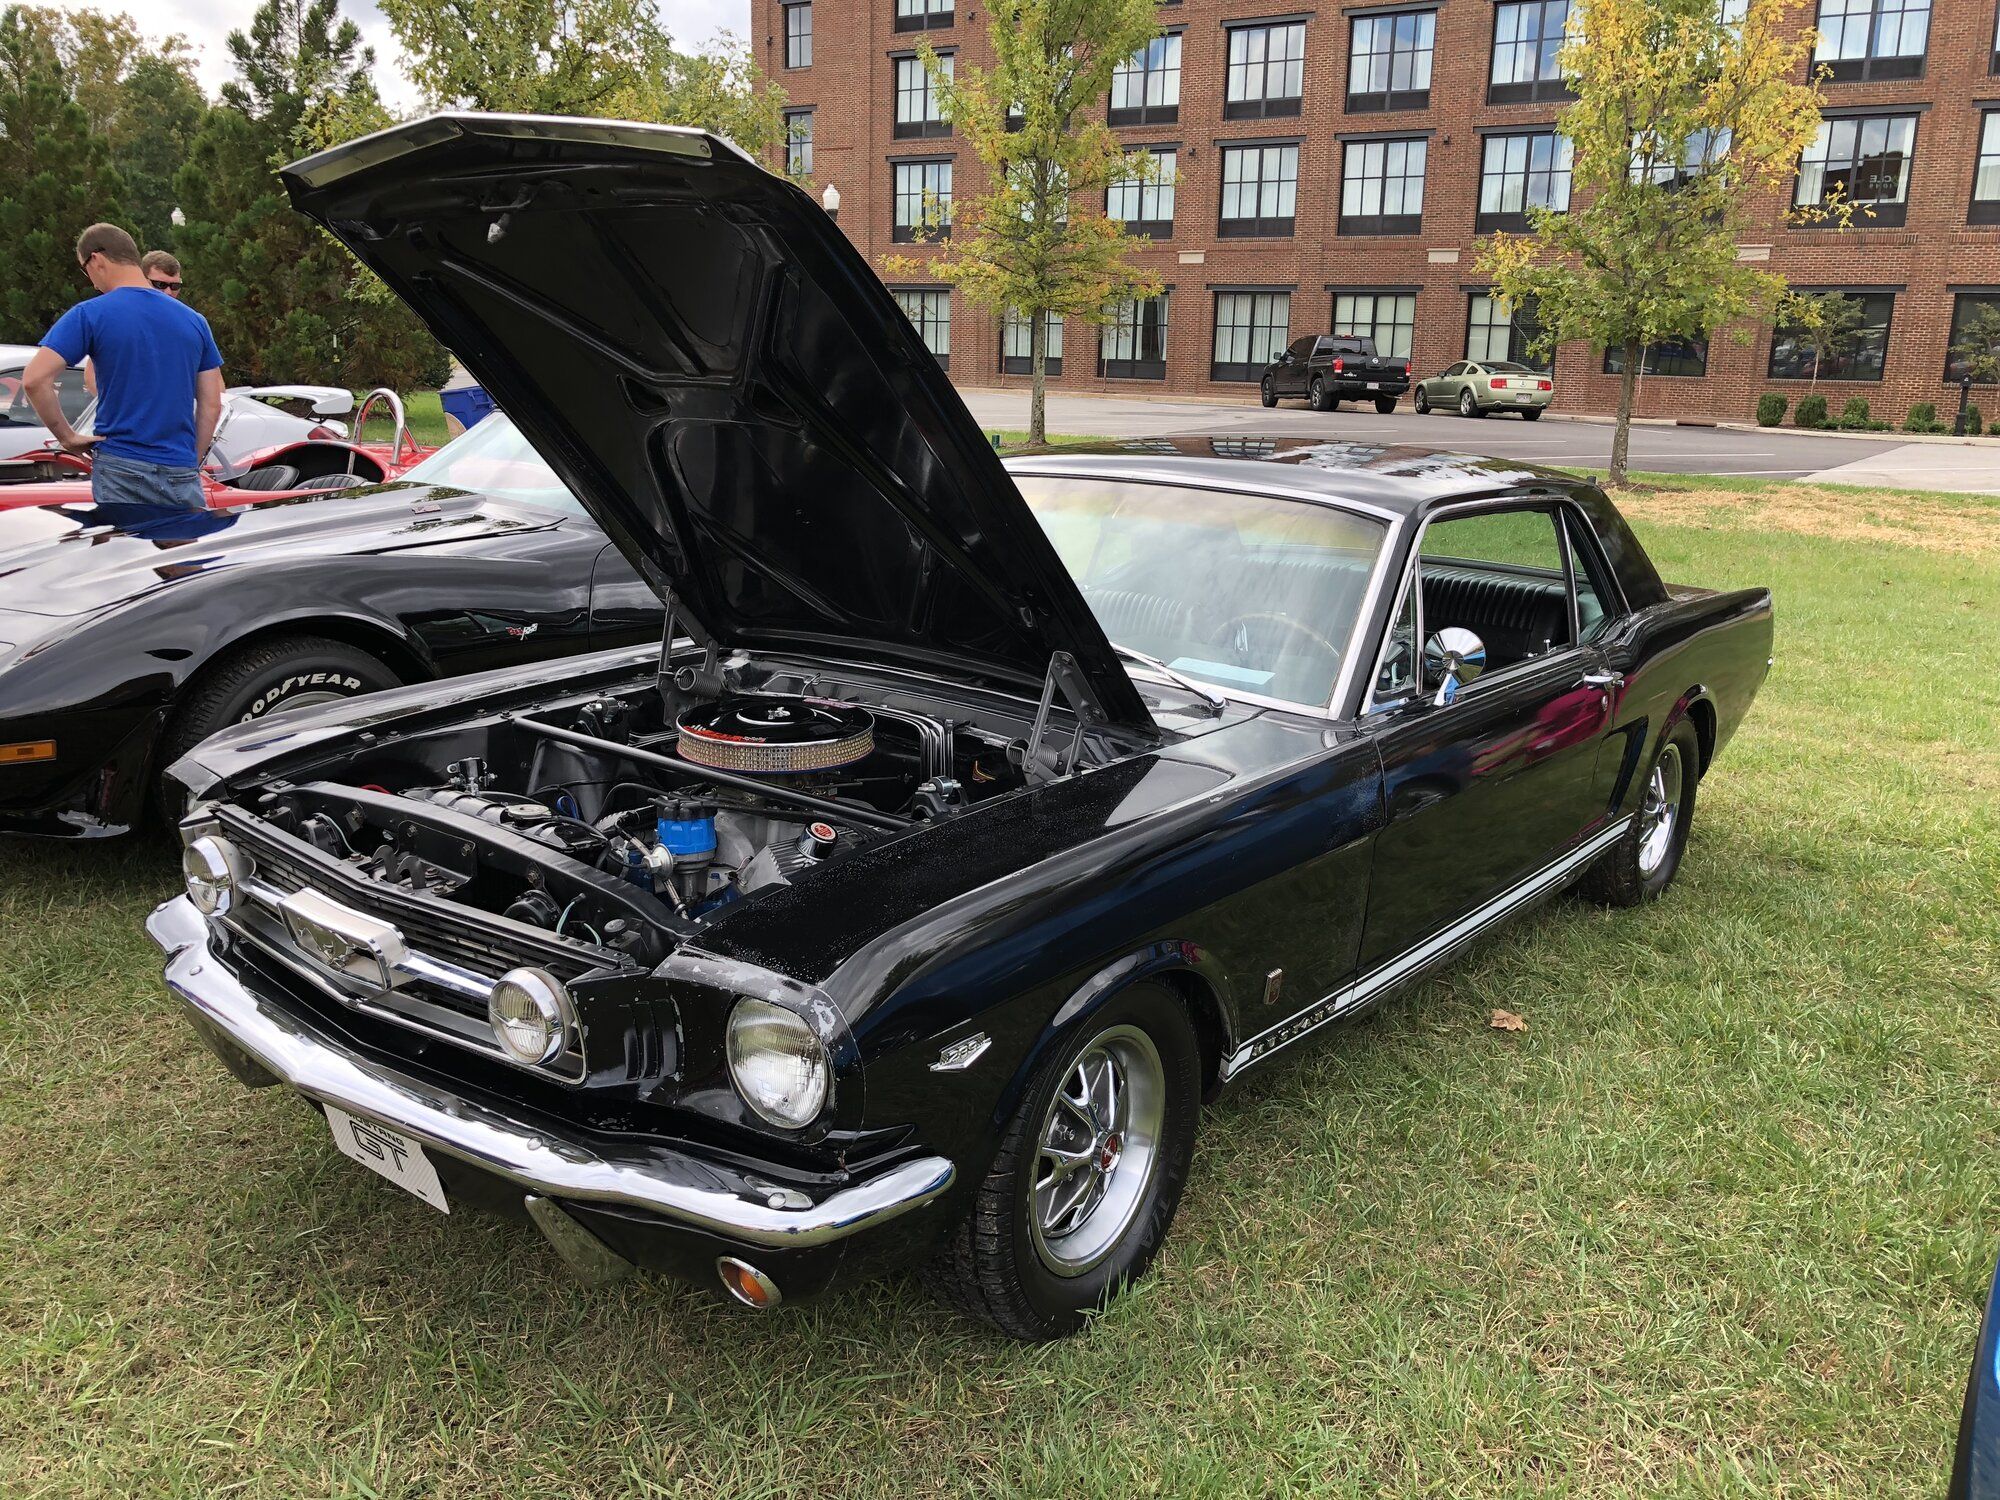 1966 Mustang
(Date Car (So says my wife))